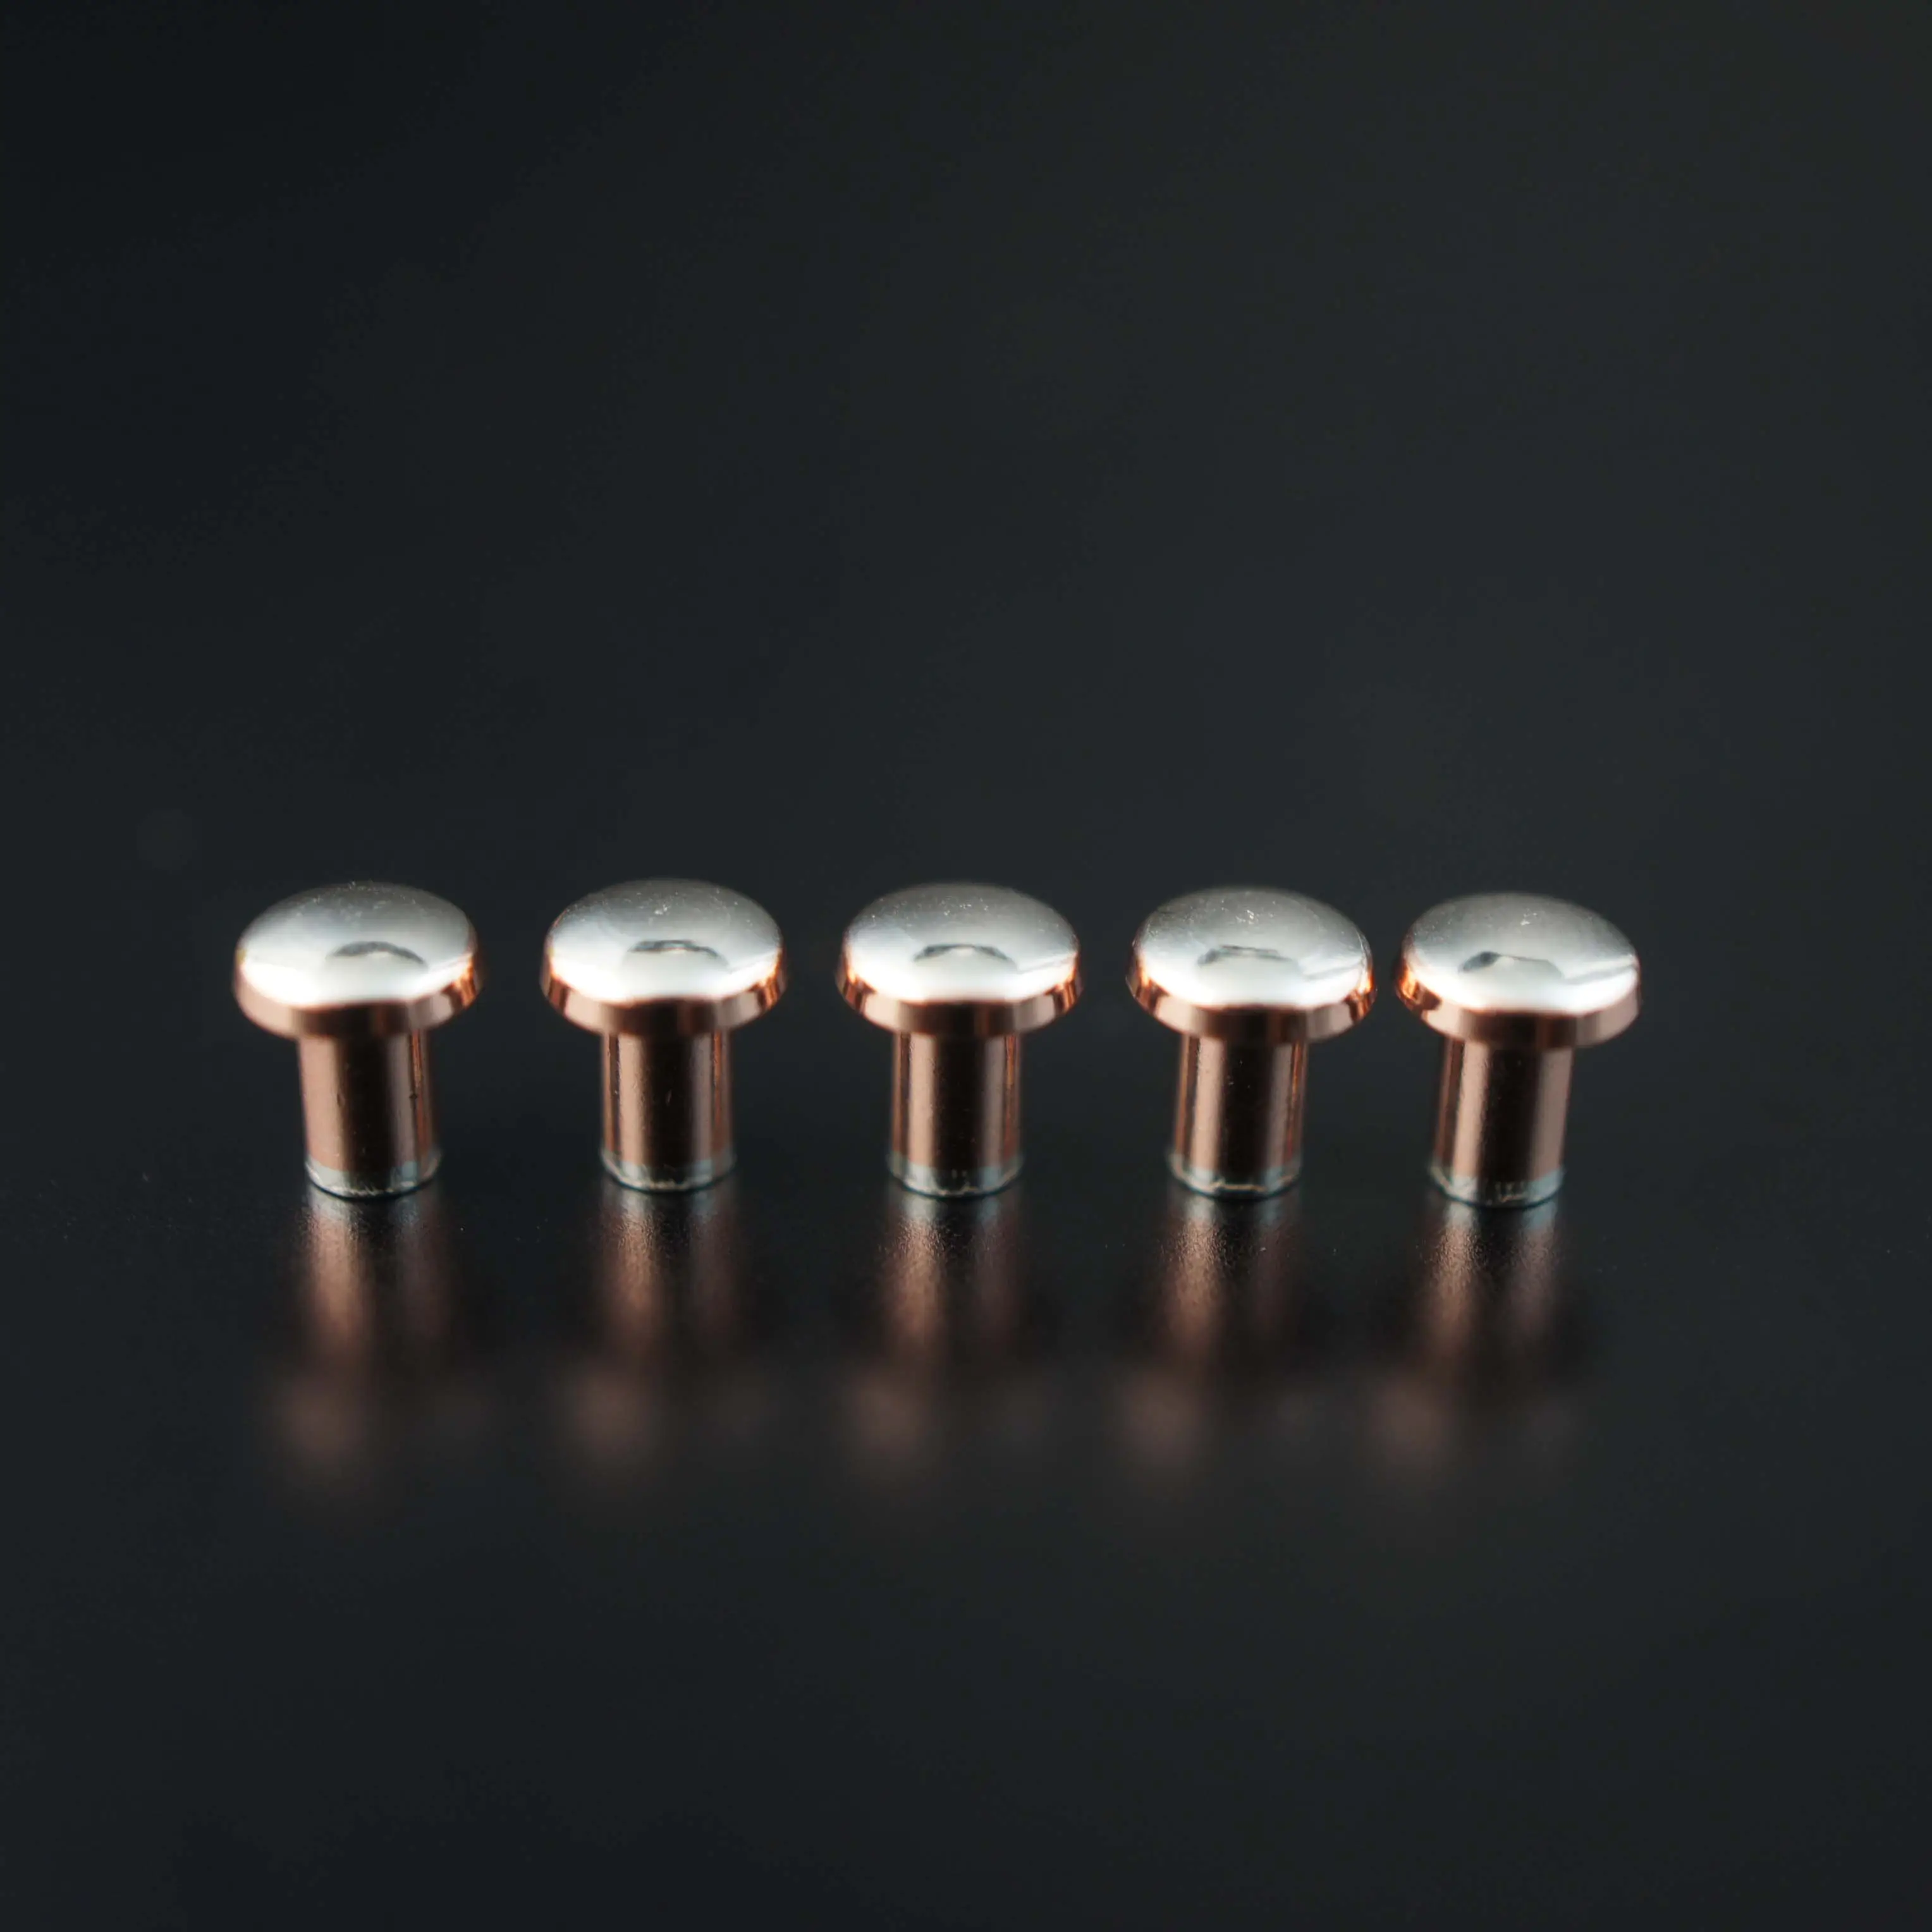 Precious AgNi Silver Screw Contact Tips Rivet Electrical Trimetal Contact Rivet For Electrical Socket Sewtich Relay